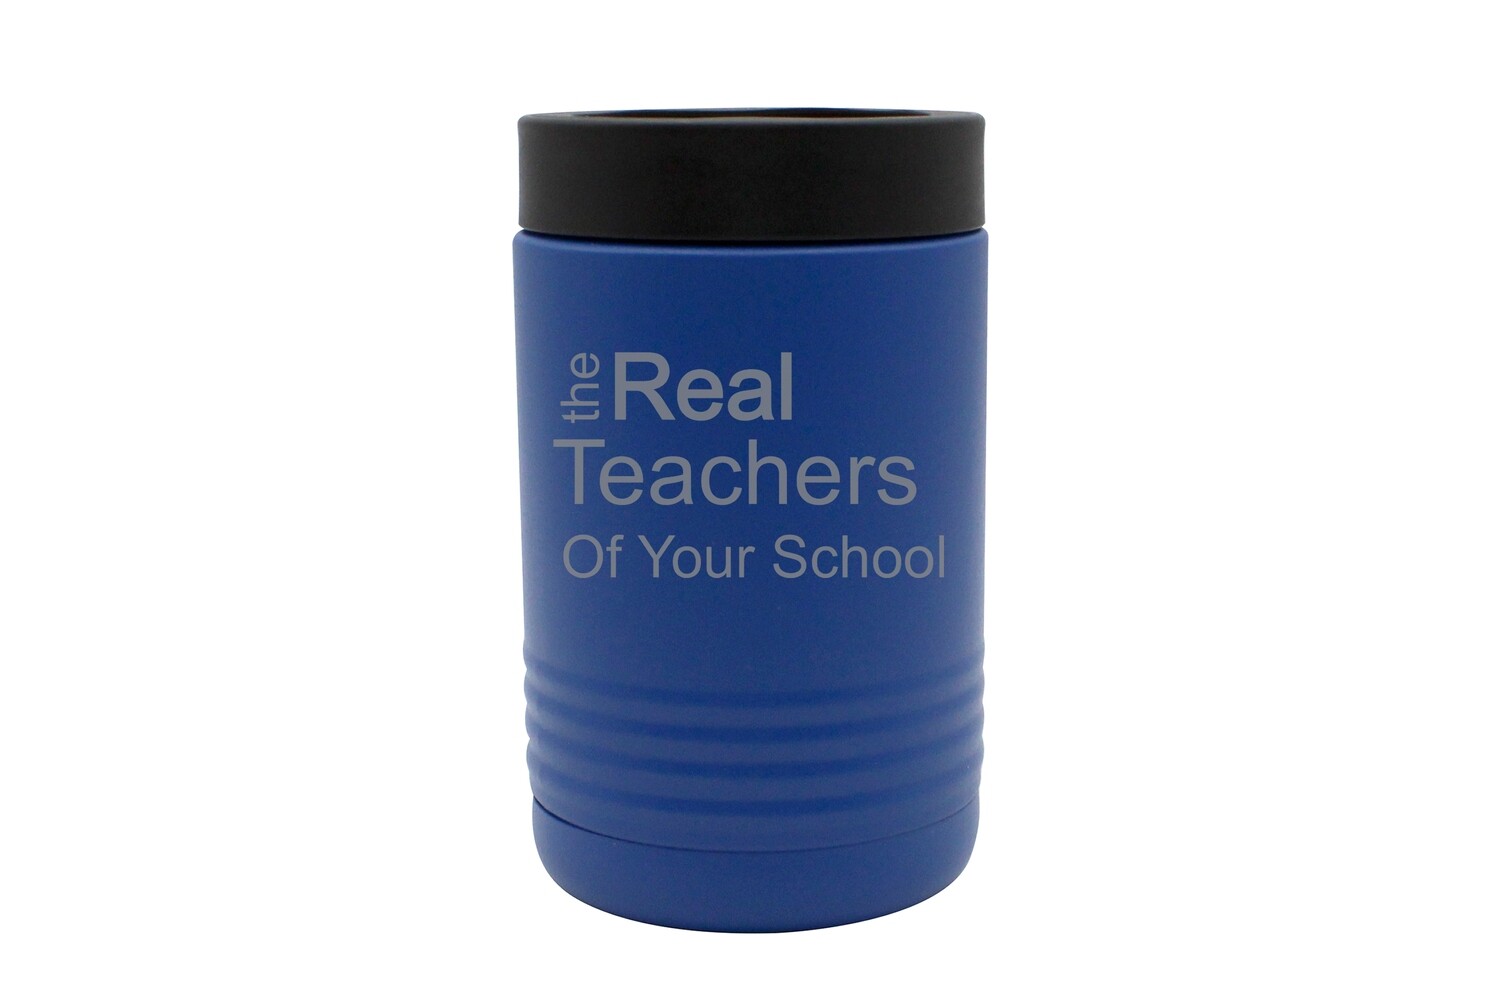 The Real Teachers of (Add Your School) Insulated Beverage Holder